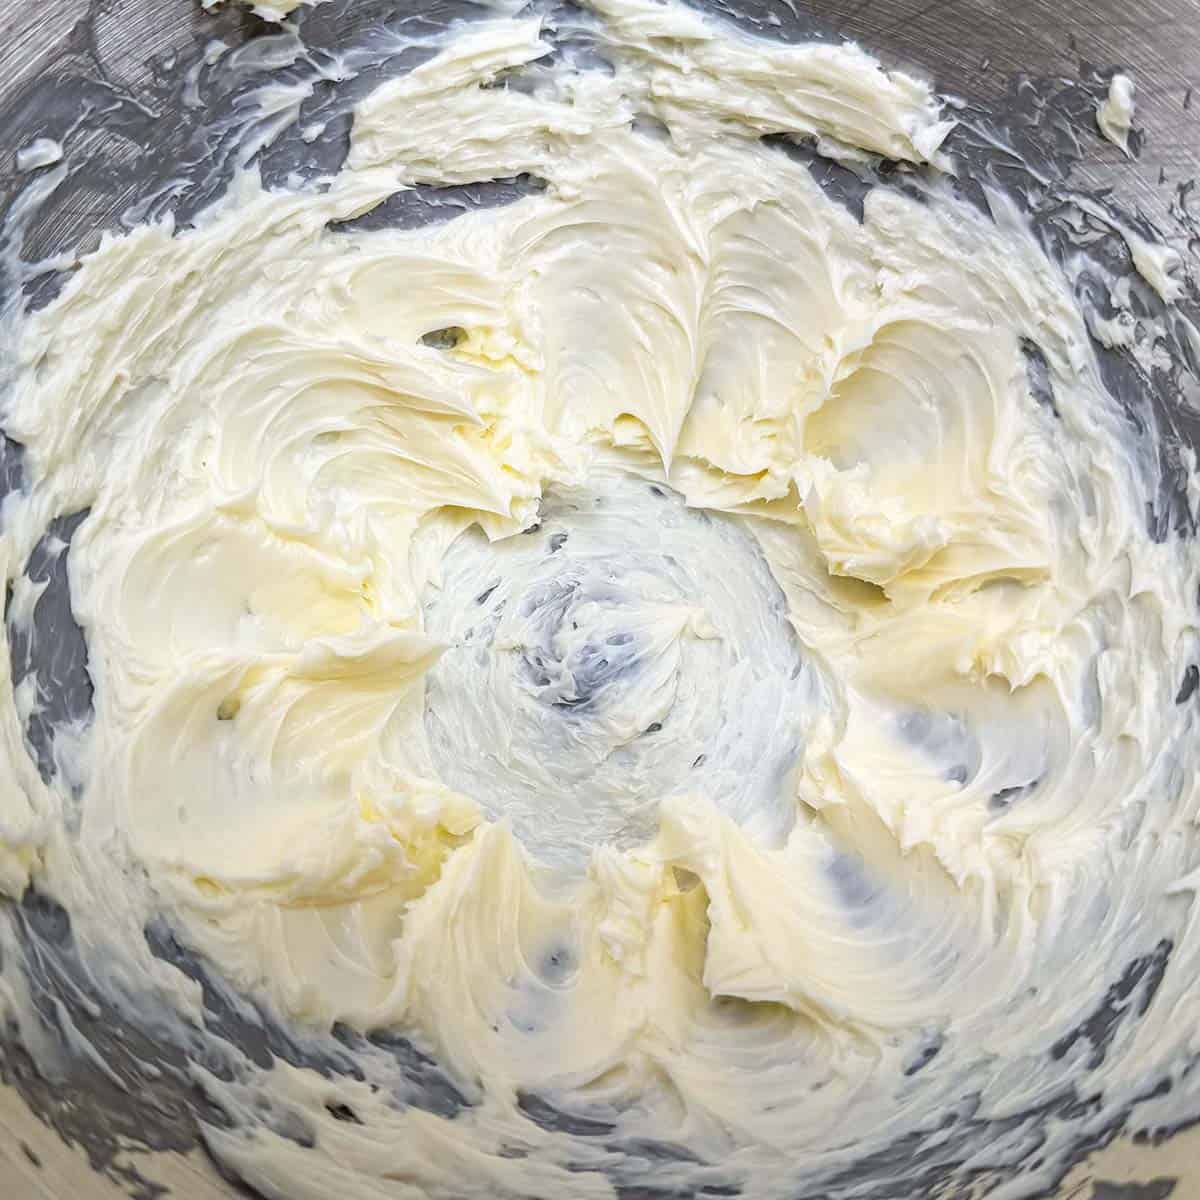 Creamed butter in a mixer bowl.